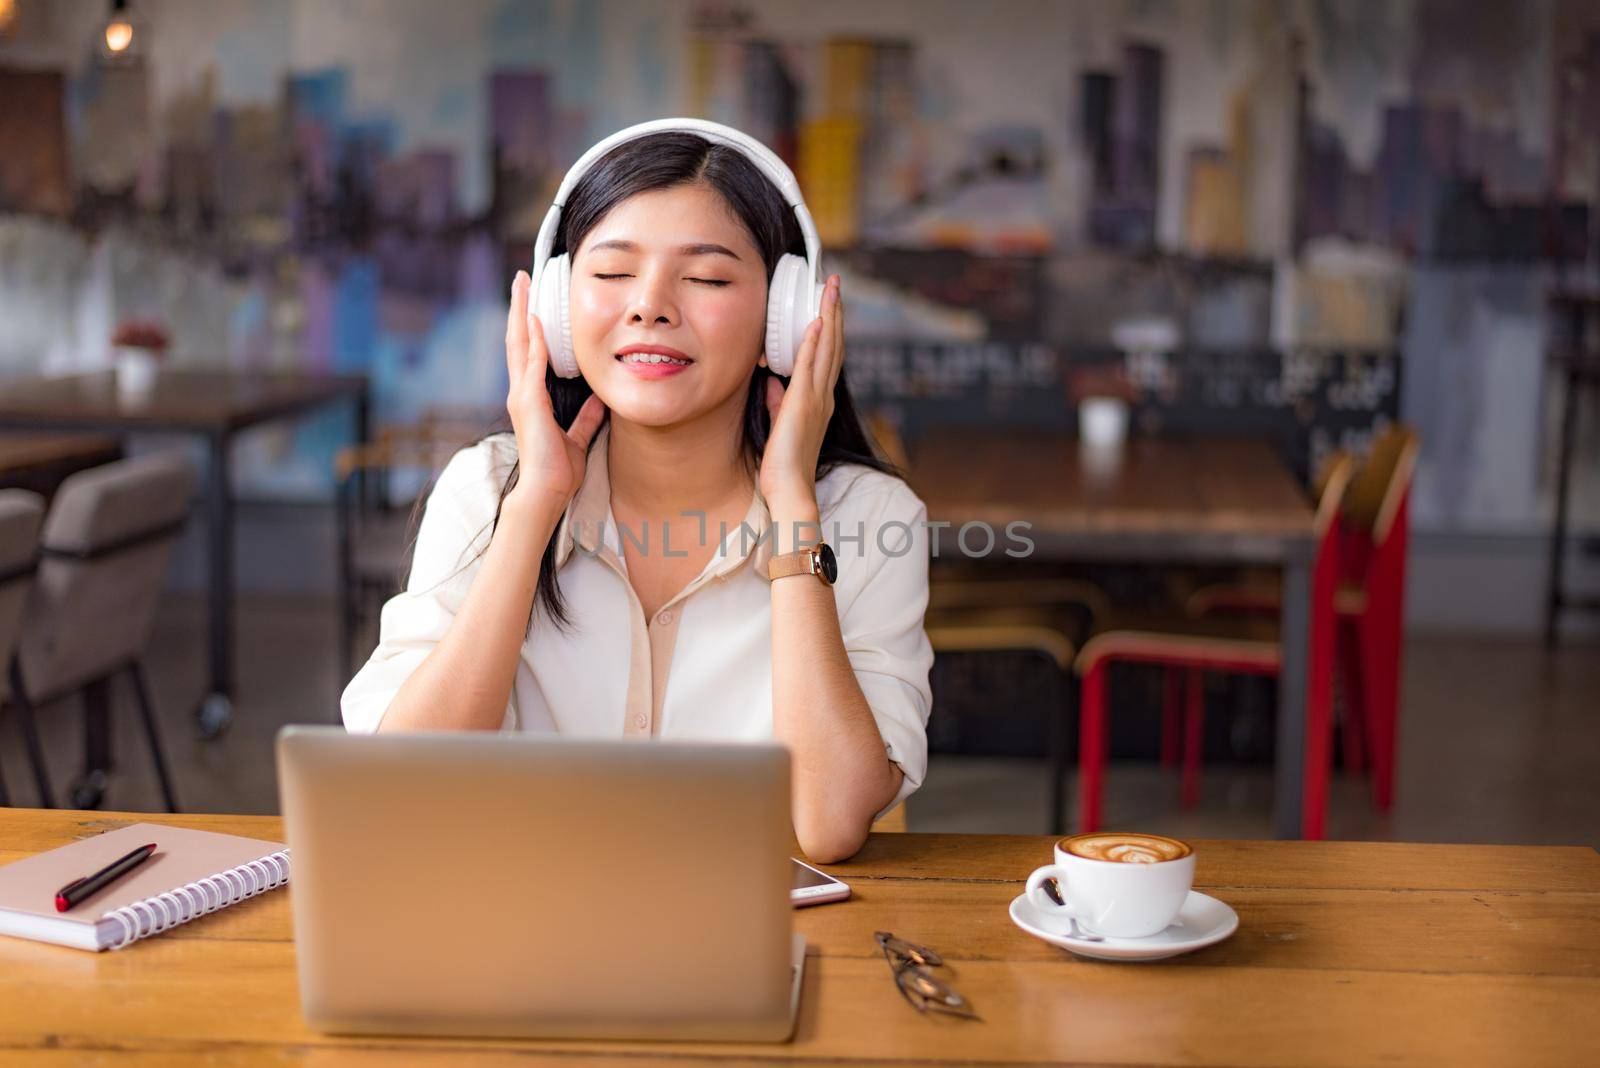 Beautiful Asian woman relaxing and listening to music in cafe with laptop computer and coffee cup. People and lifestyles concept. Freelance happy workplace theme. University and college theme. by MiniStocker